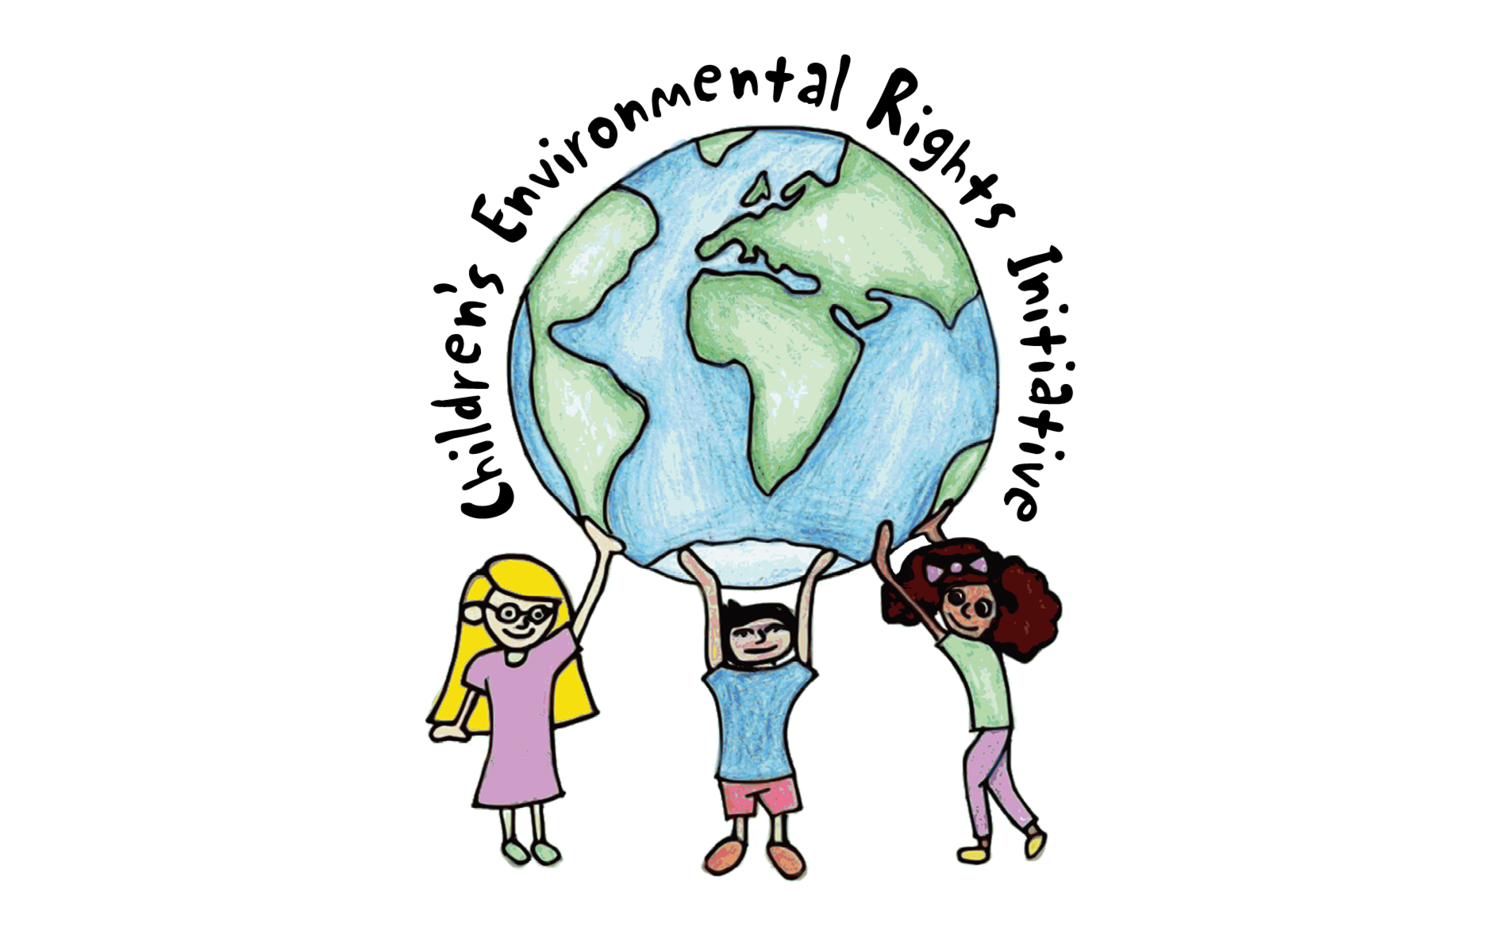 Global Initiative on Advancing Children's Right to a Healthy Environment  Launched! — Project Dryad